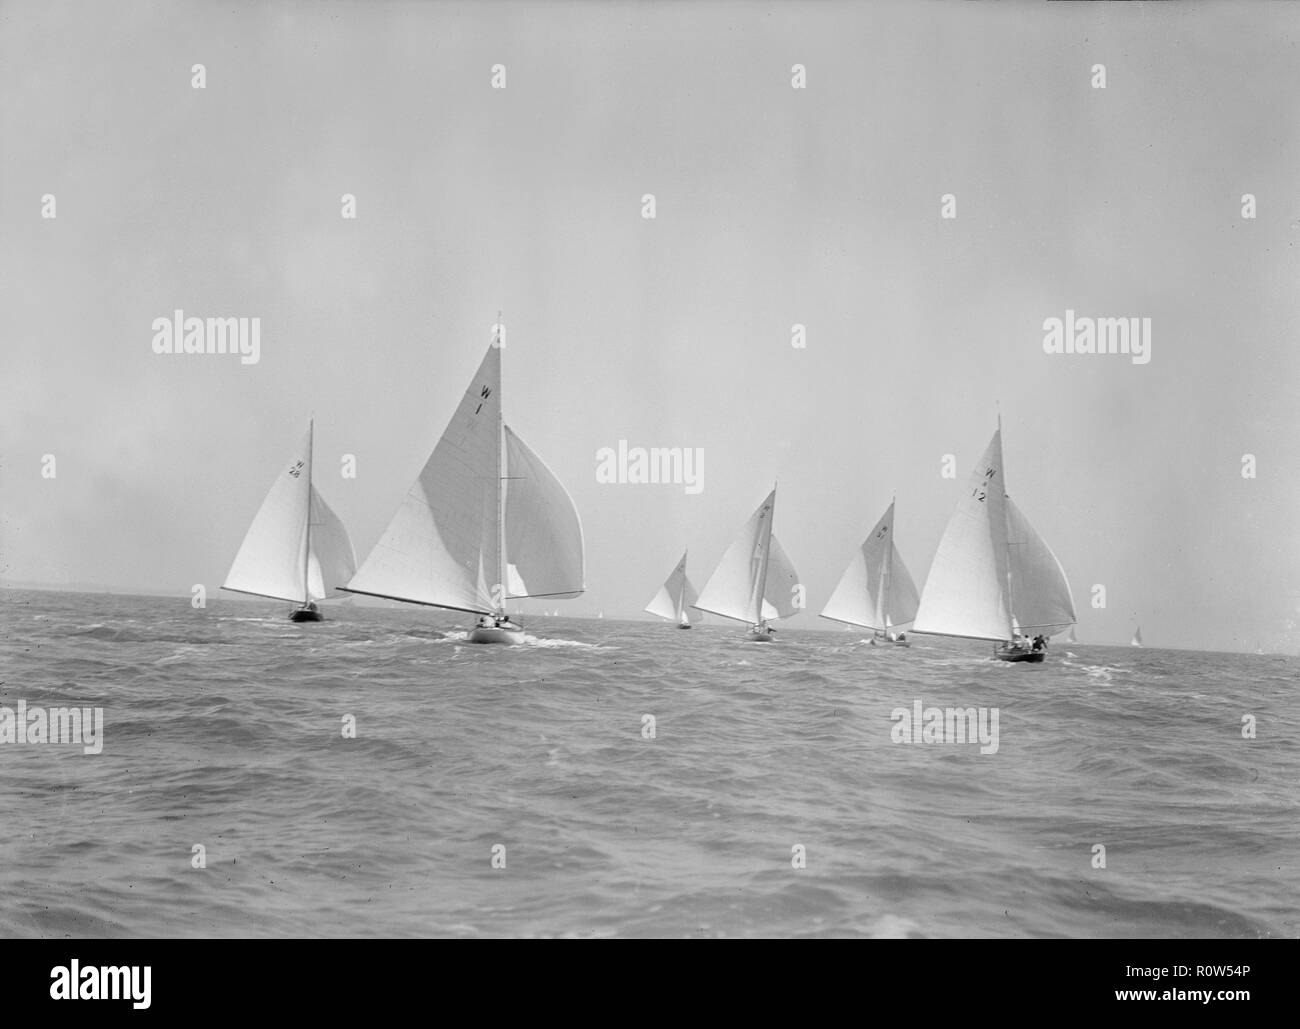 Stern view of W Class boats racing downwind, 1933. Creator: Kirk & Sons of Cowes. Stock Photo